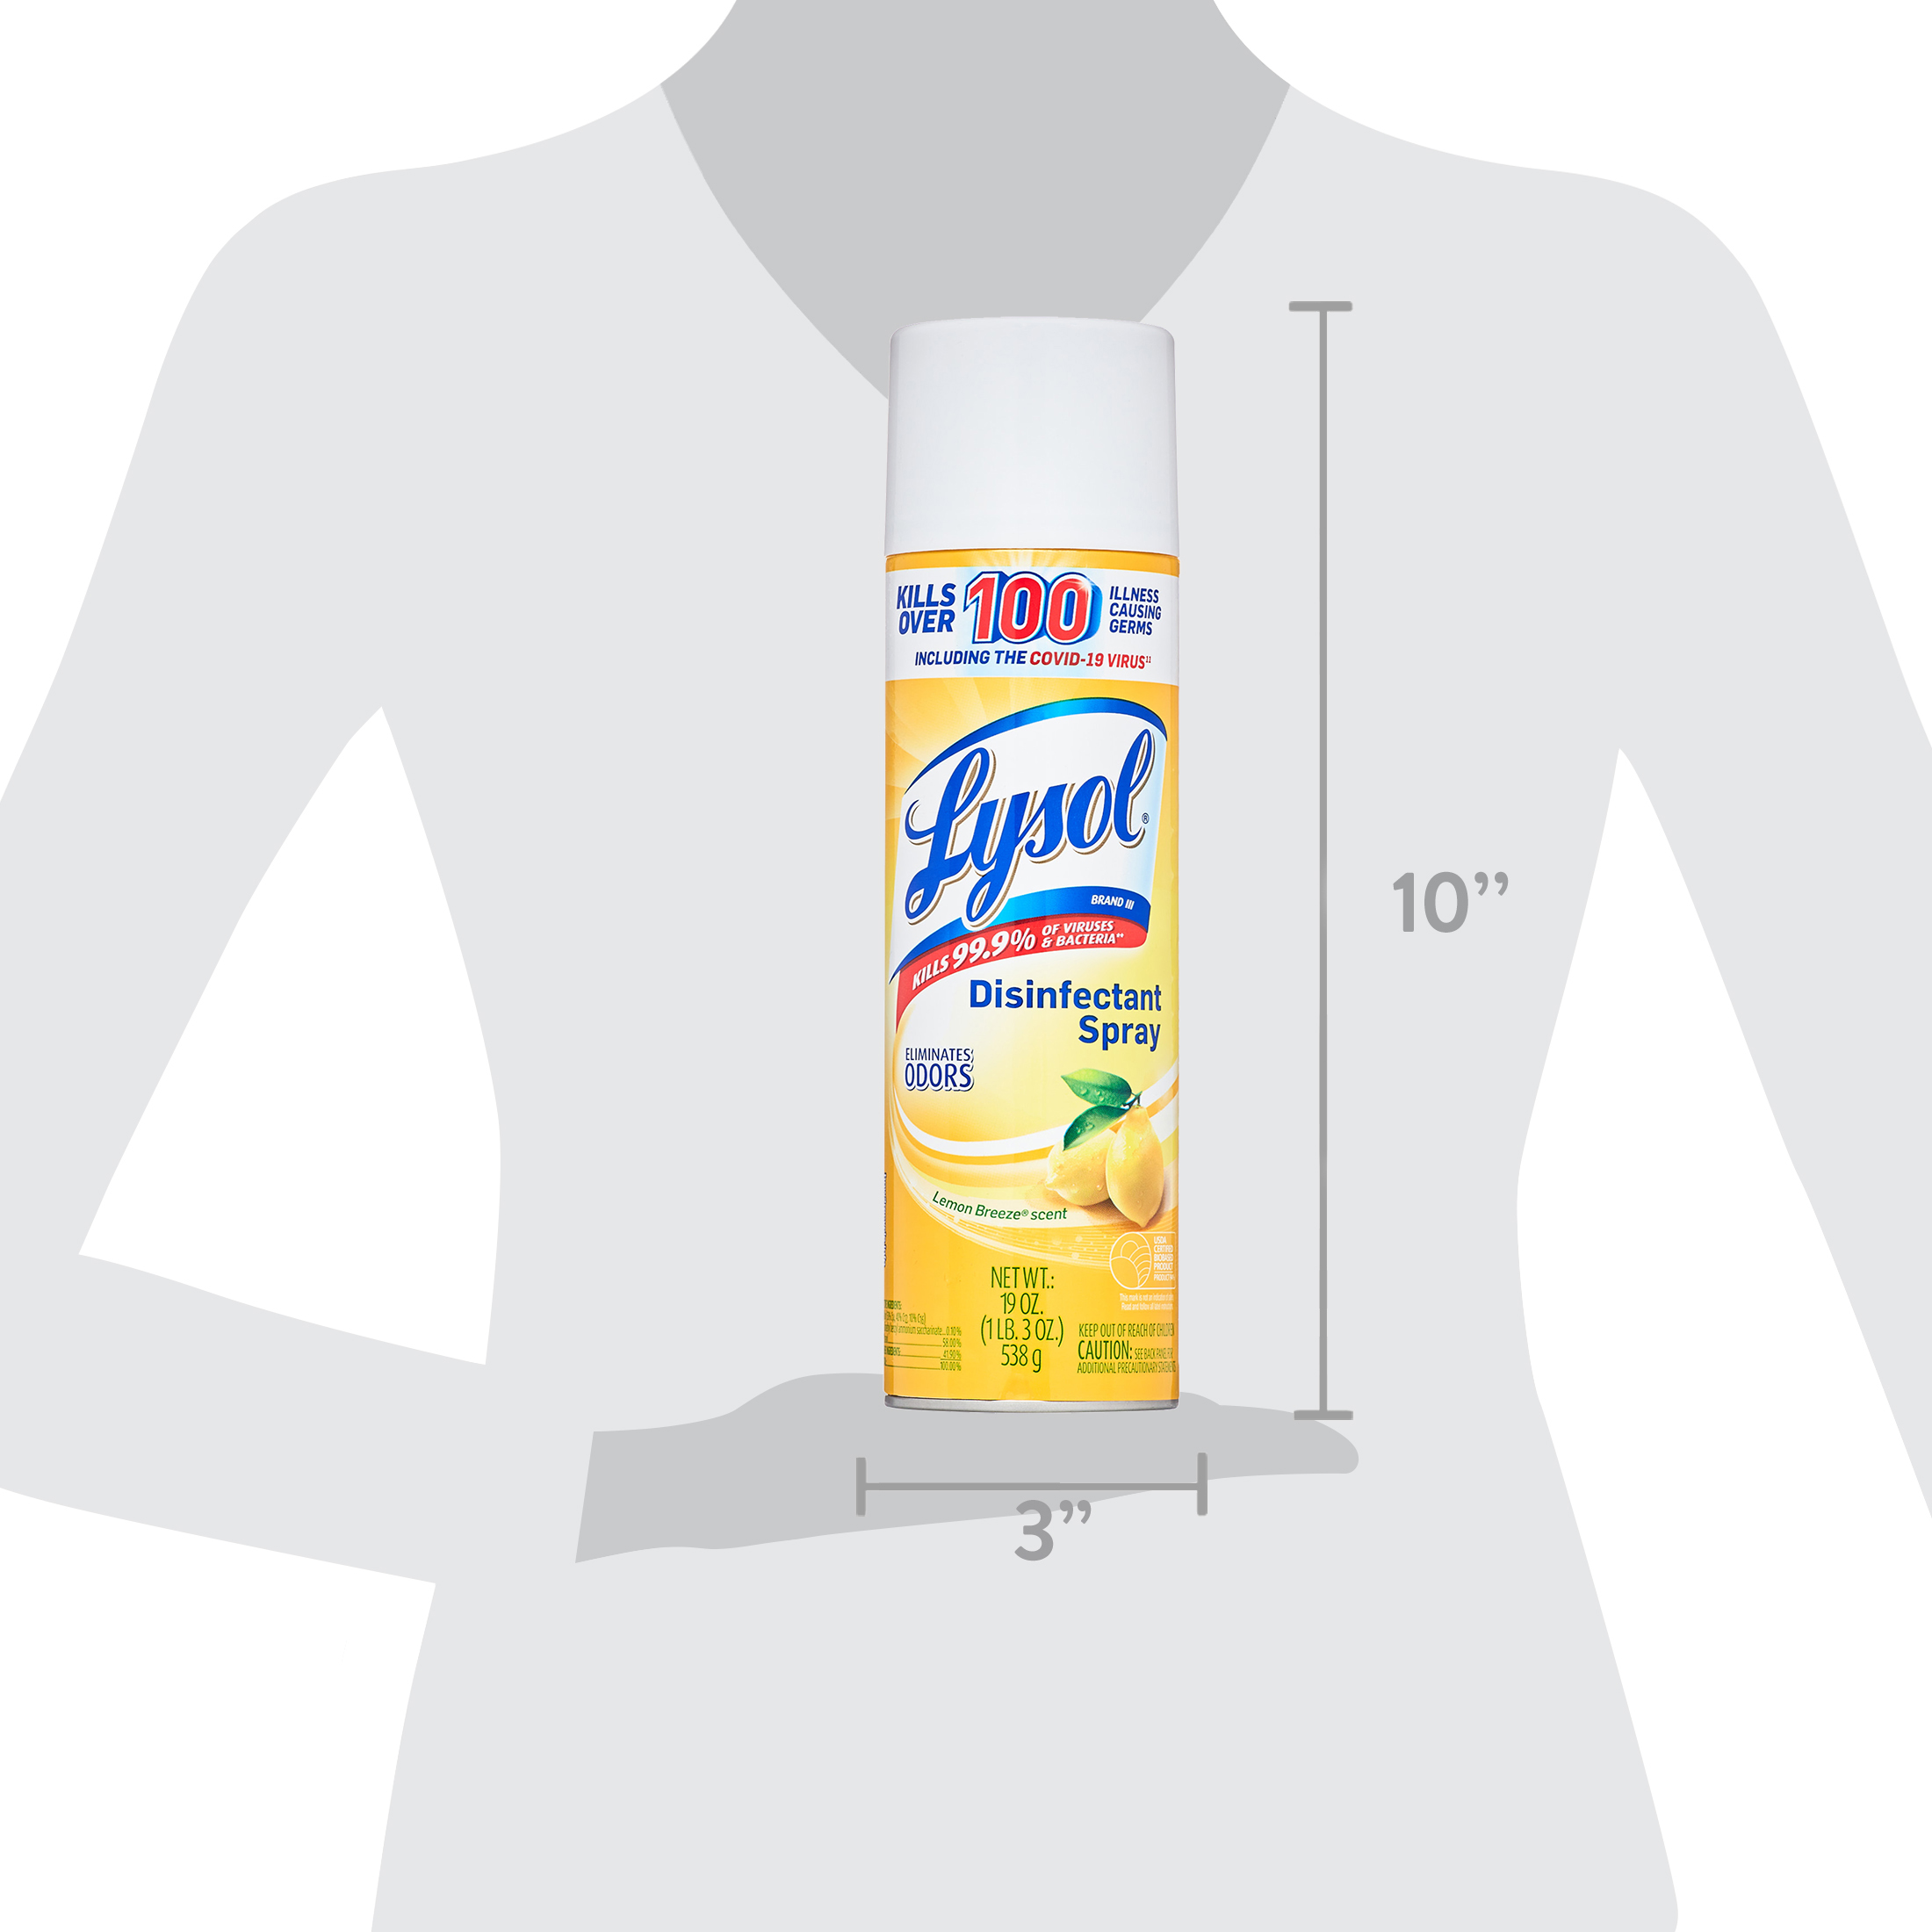 Lysol Disinfectant Spray, Lemon Breeze, 19oz, Tested and Proven to Kill COVID-19 Virus, Packaging May Vary​ - image 9 of 9